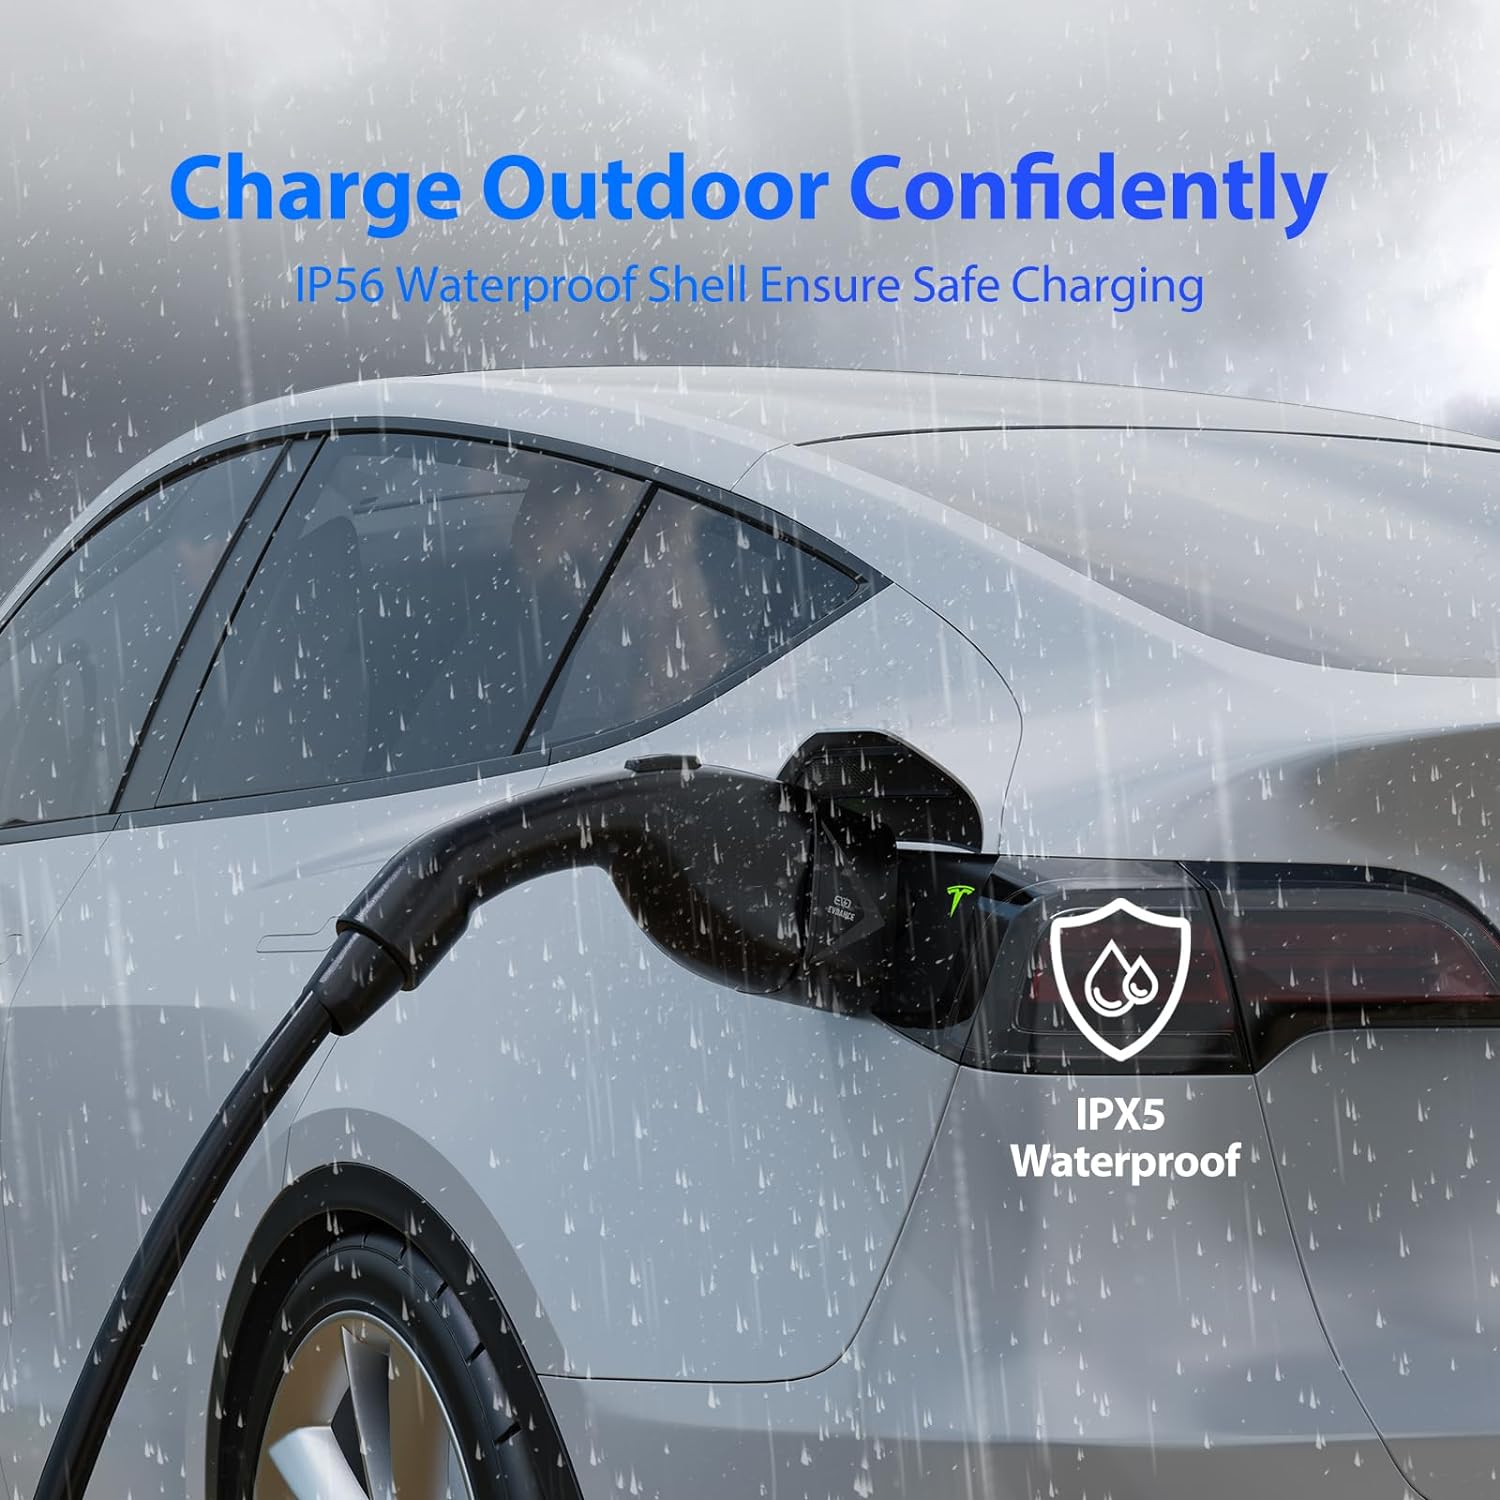 Model Y Charging With Tesla's CCS Combo Adapter: First Use Details